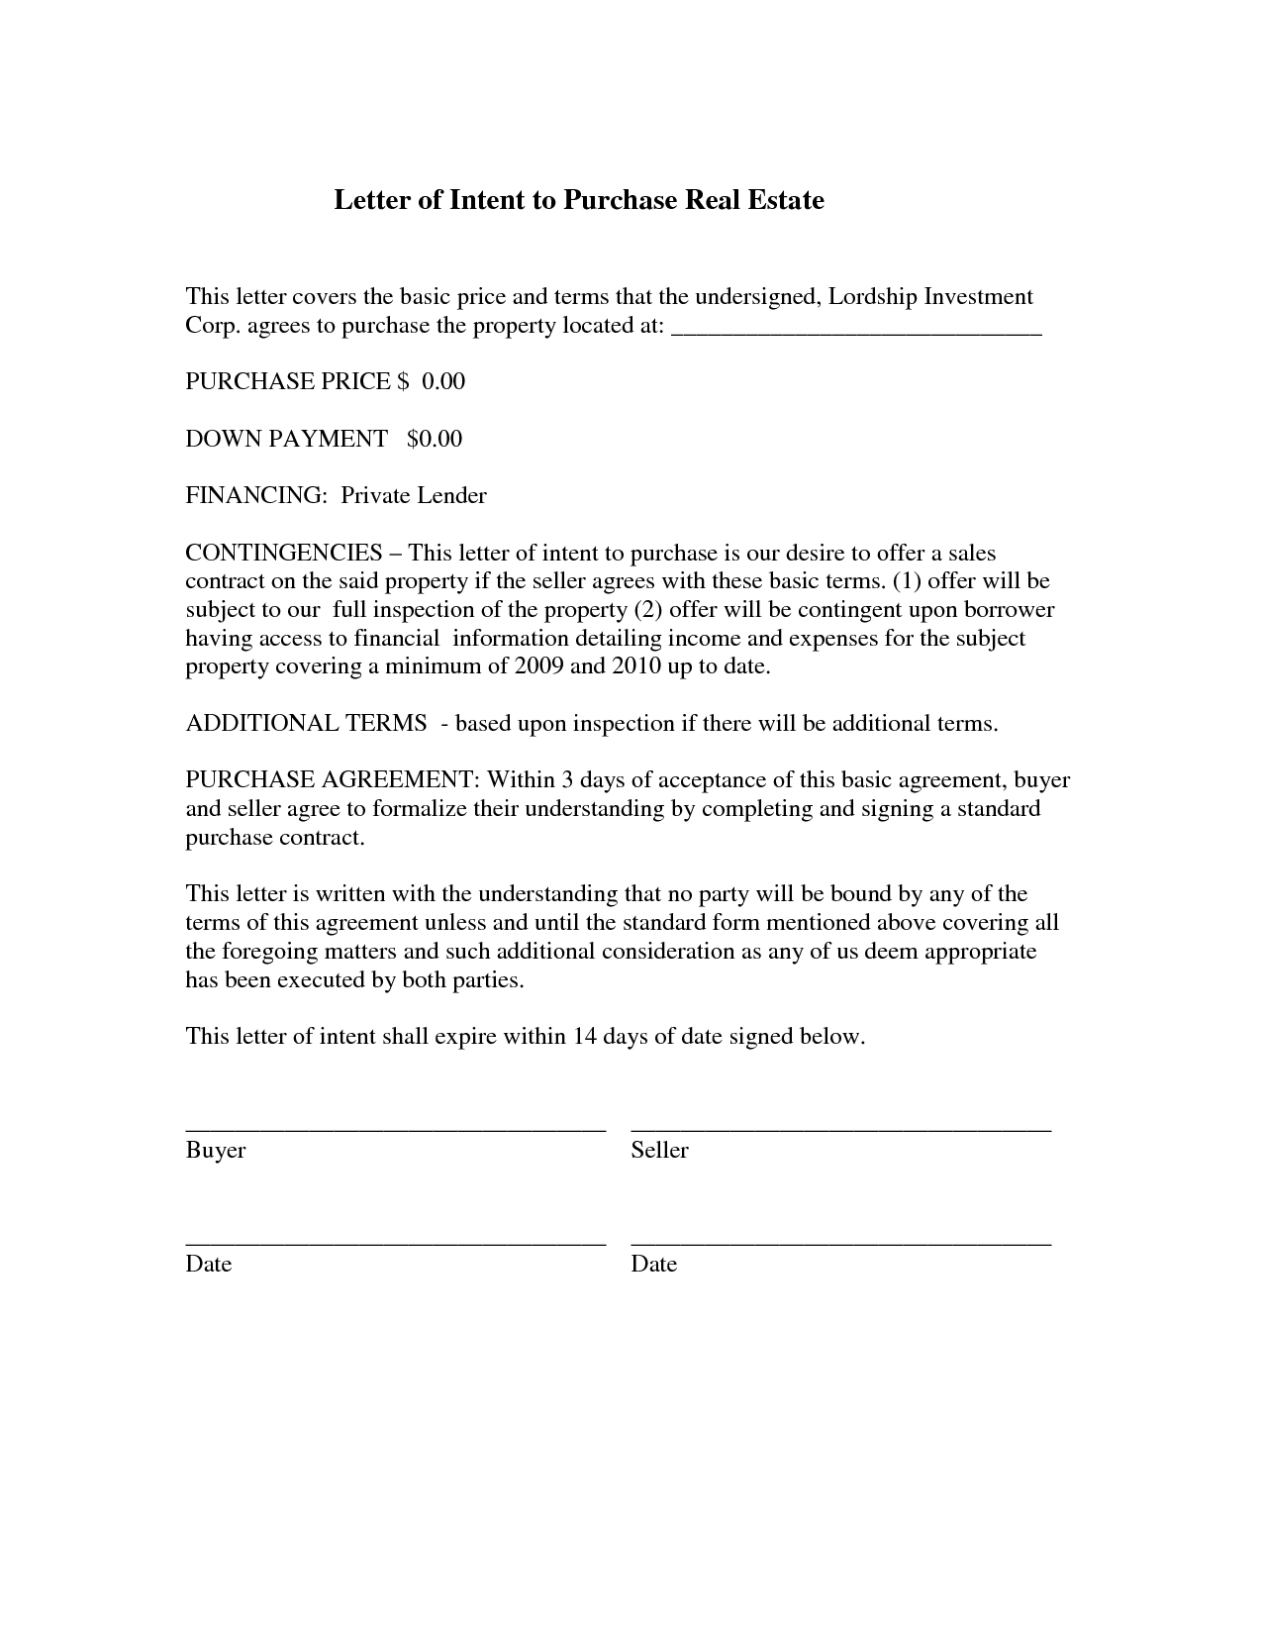 Letter Of Intent To Purchase Land Template Samples – Letter Template For Letter Of Intent For Real Estate Purchase Template